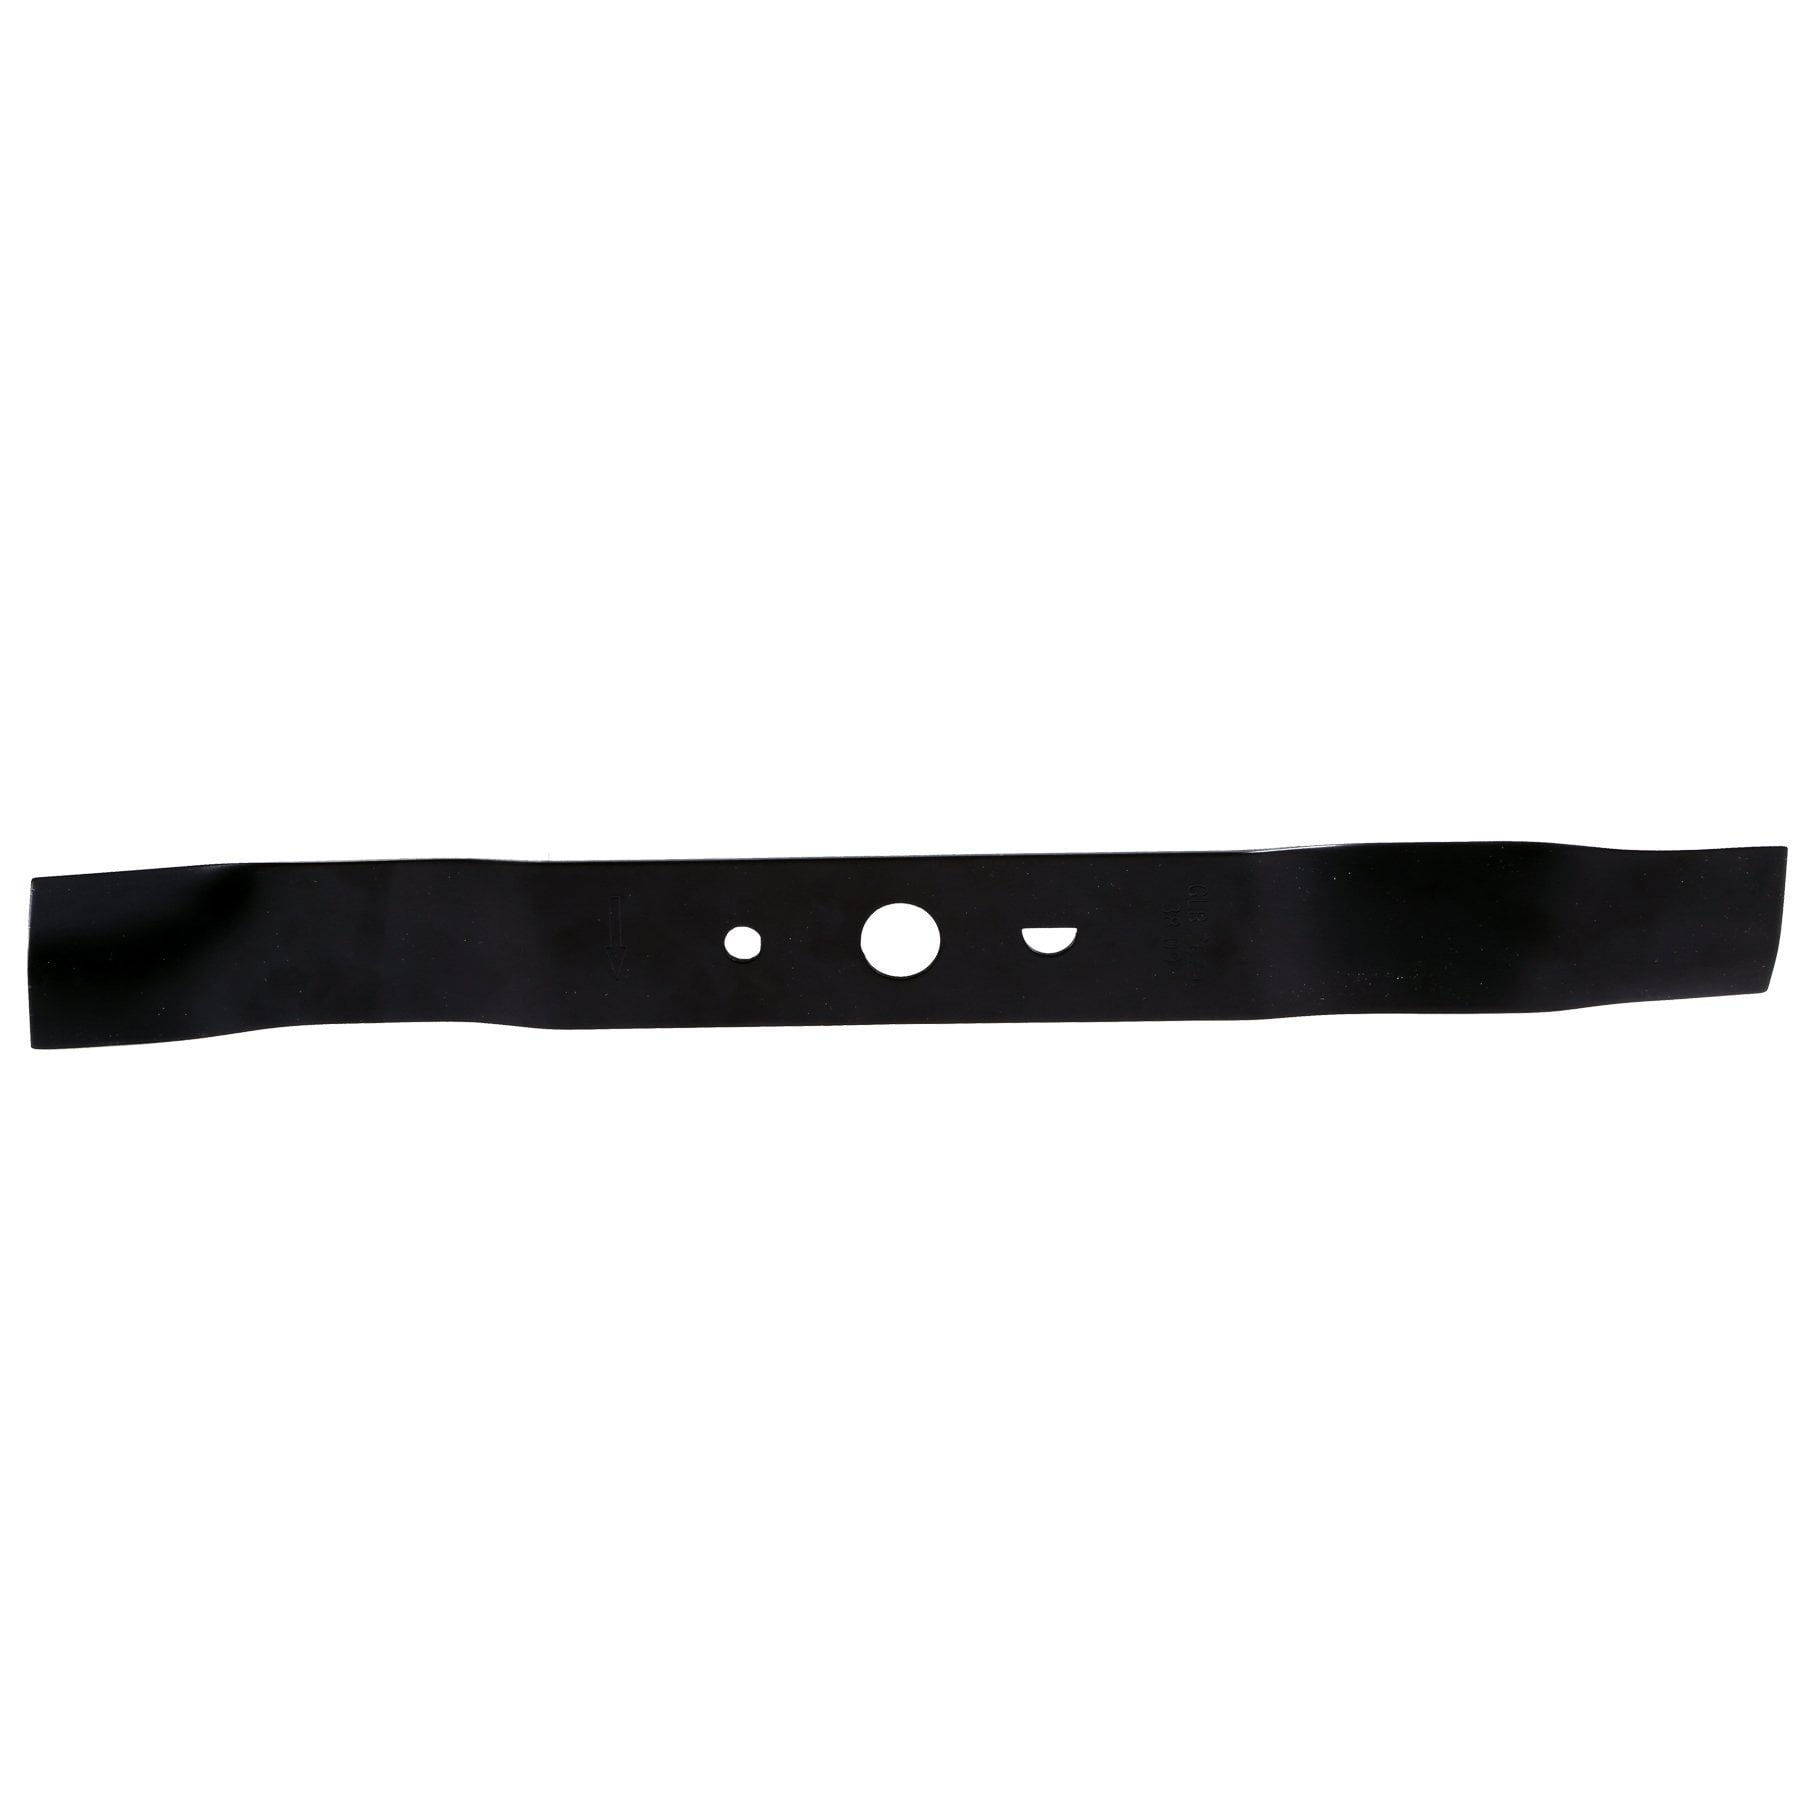 Greenworks 21 Inch Replacement Lawn Mower Blade 29423